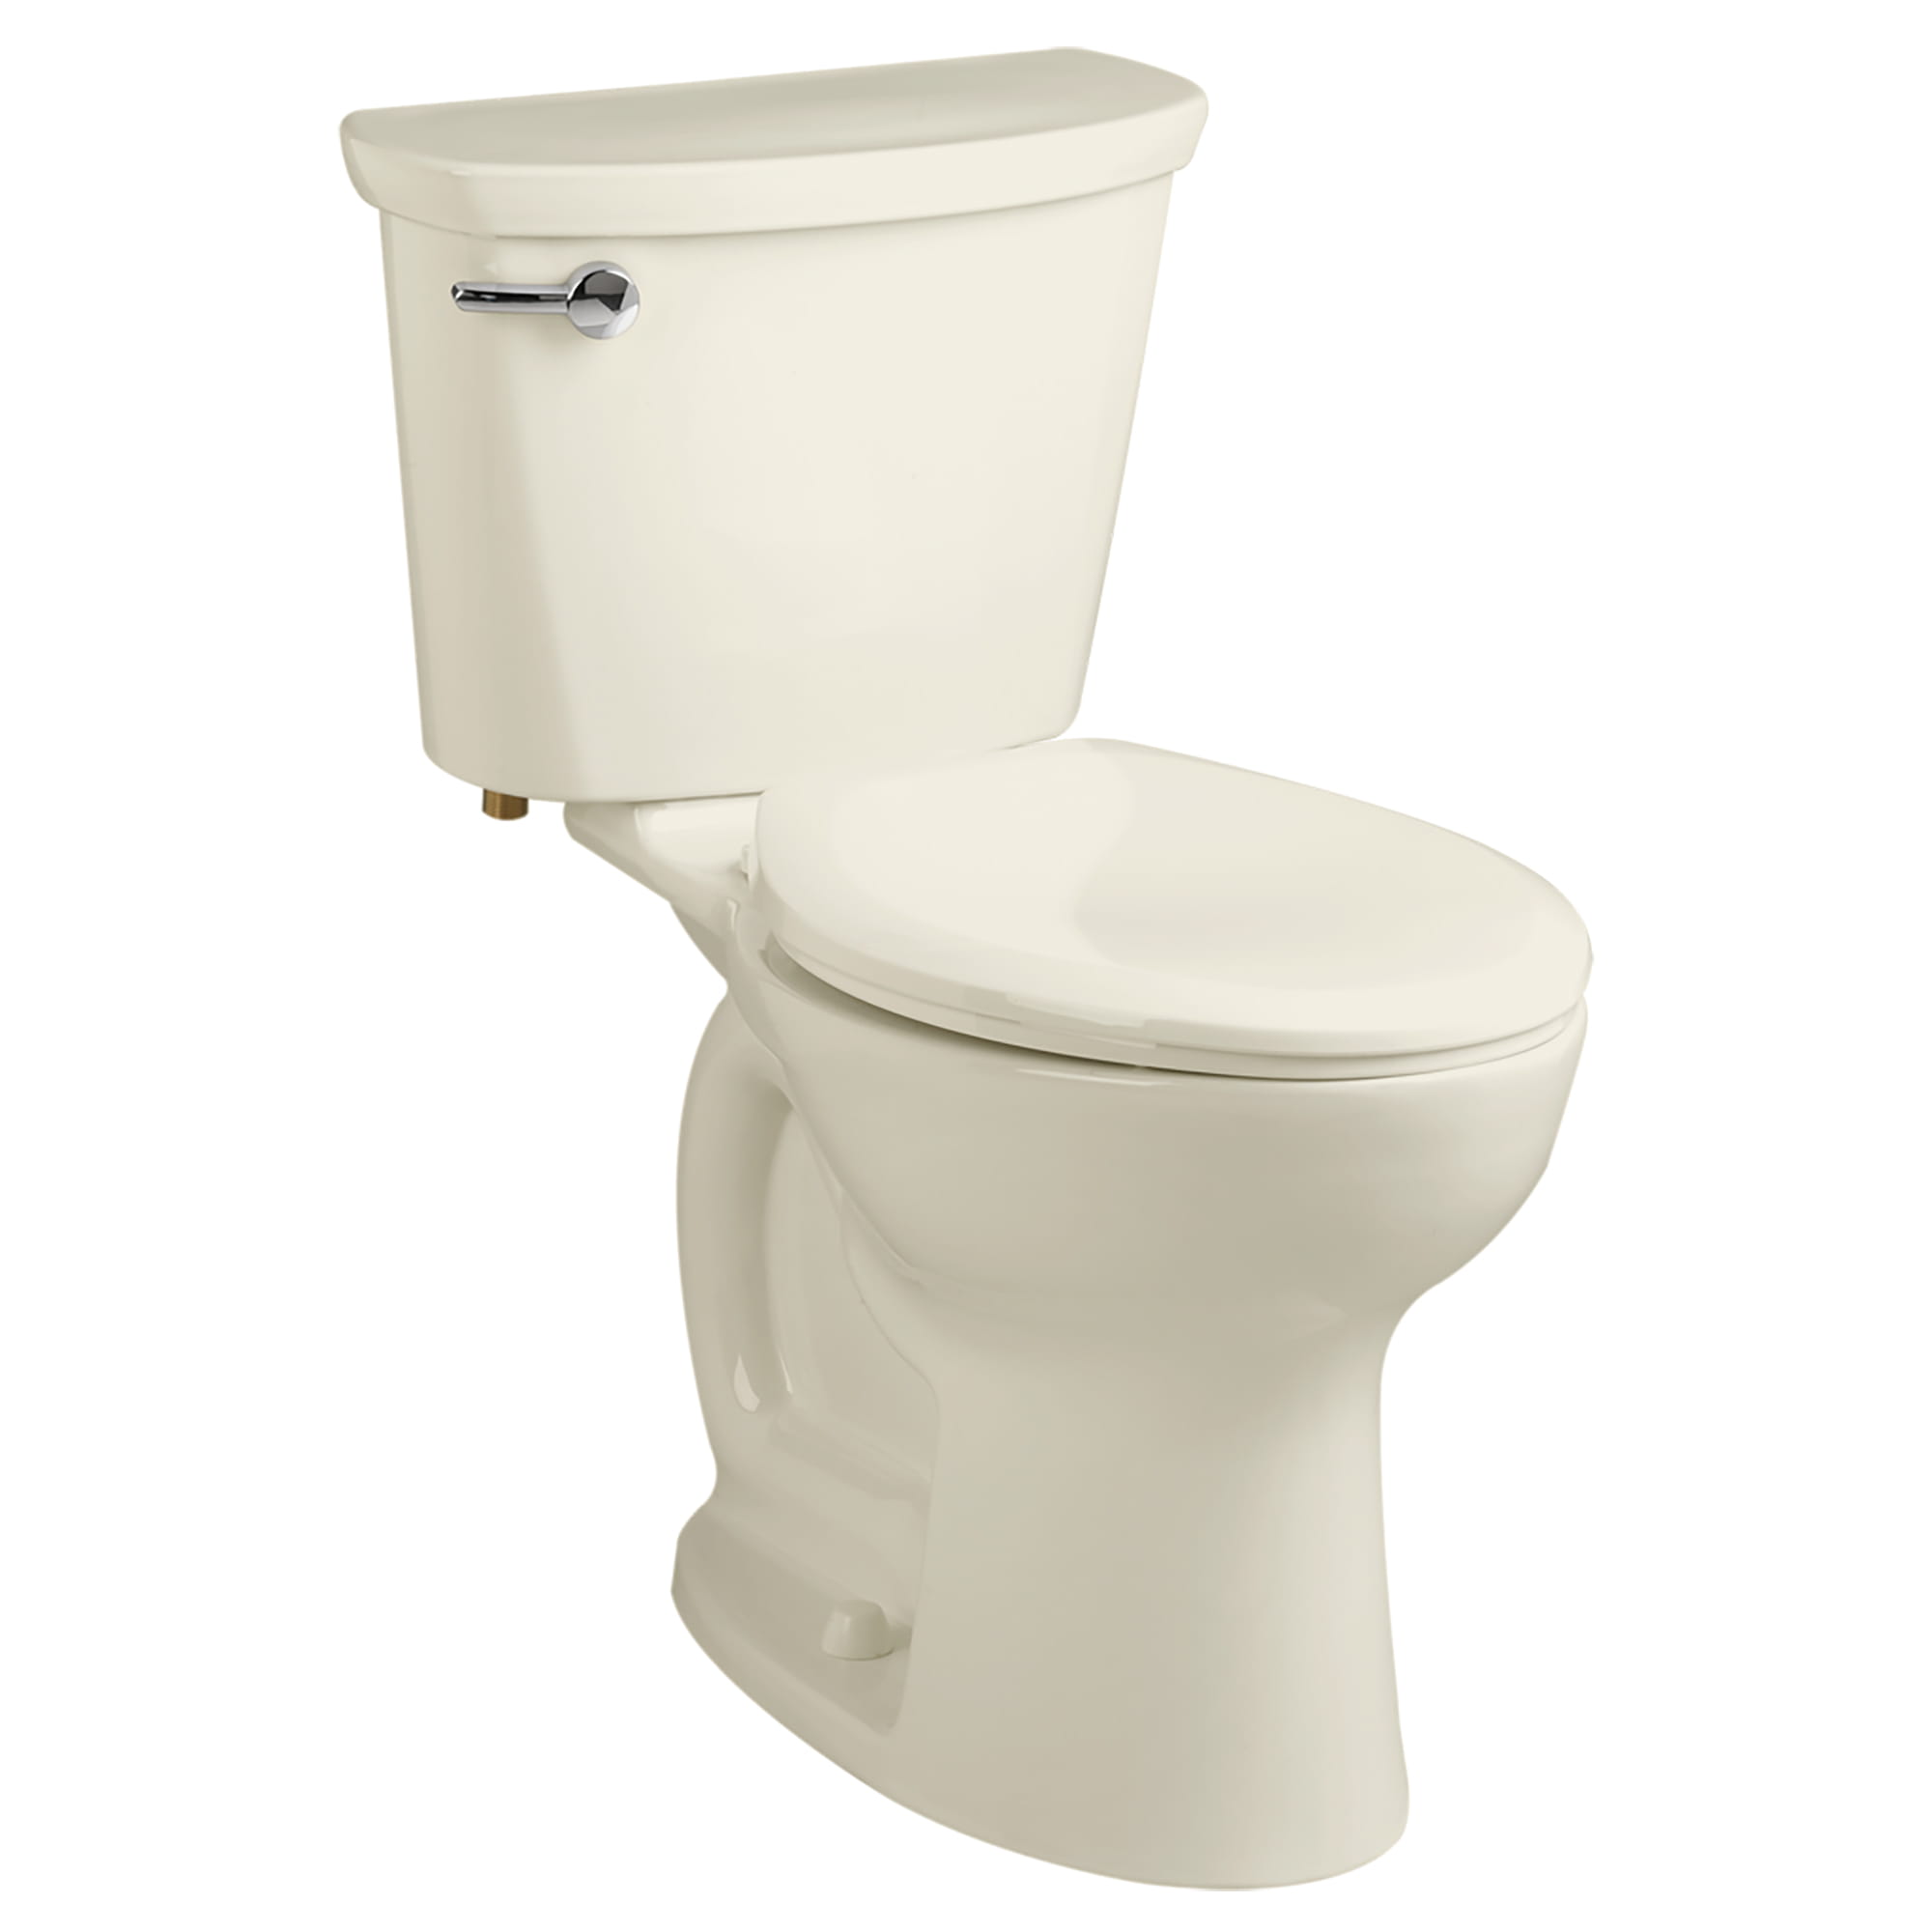 Cadet PRO Two Piece 16 gpf 60 Lpf Compact Chair Height Elongated 14 Inch Rough Toilet Less Seat LINEN